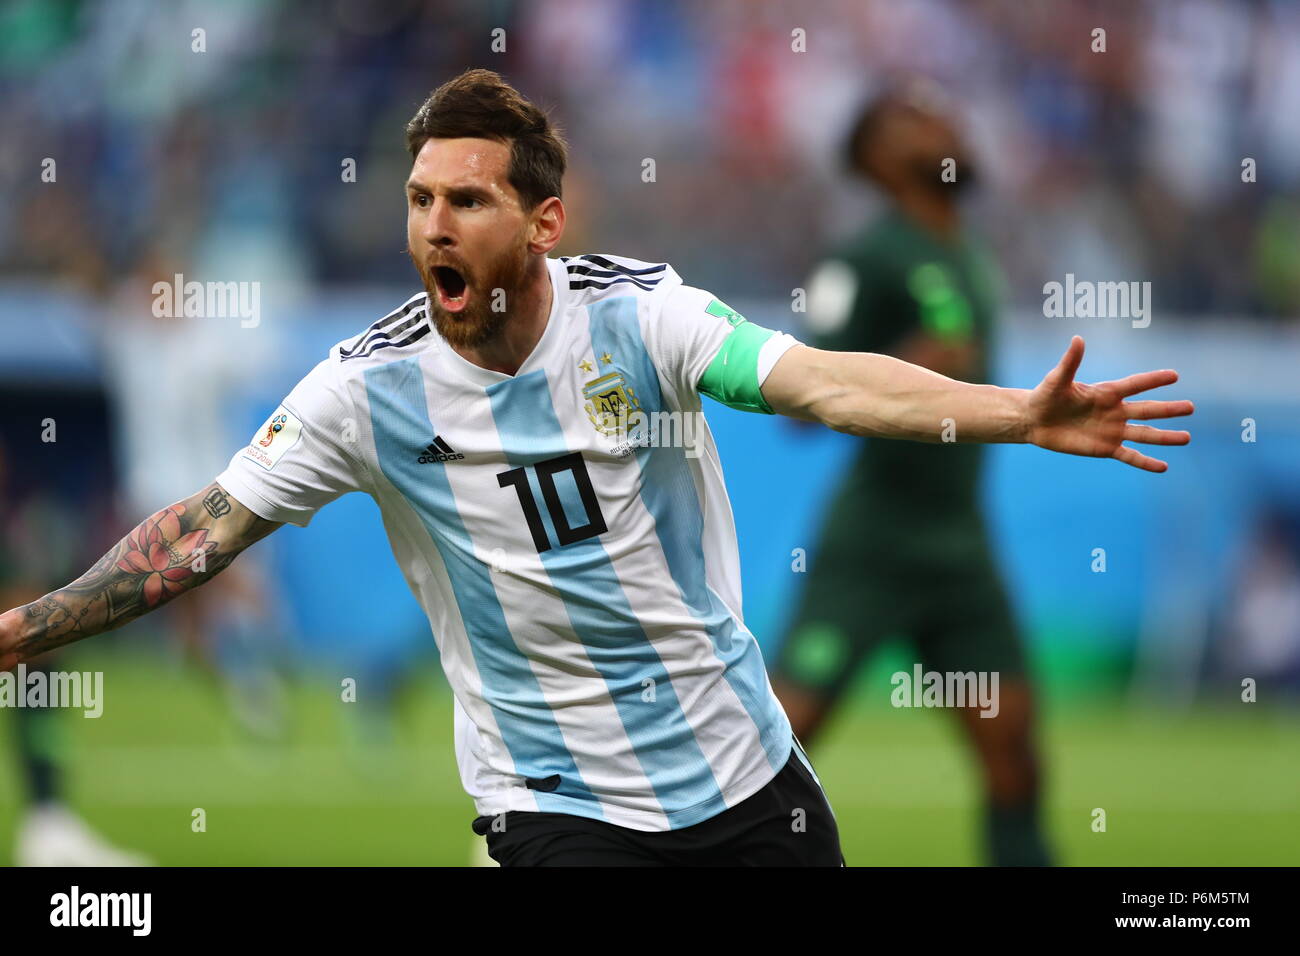 Lionel Messi (ARG), celebrates scoring the opening goal during the FIFA World Cup Russia 2018 Group D match between Nigeria and Argentina at Krestovsky Stadium in Saint Petersburg, Russia, June 26, 2018. Credit: Kenzaburo Matsuoka/AFLO/Alamy Live News Stock Photo